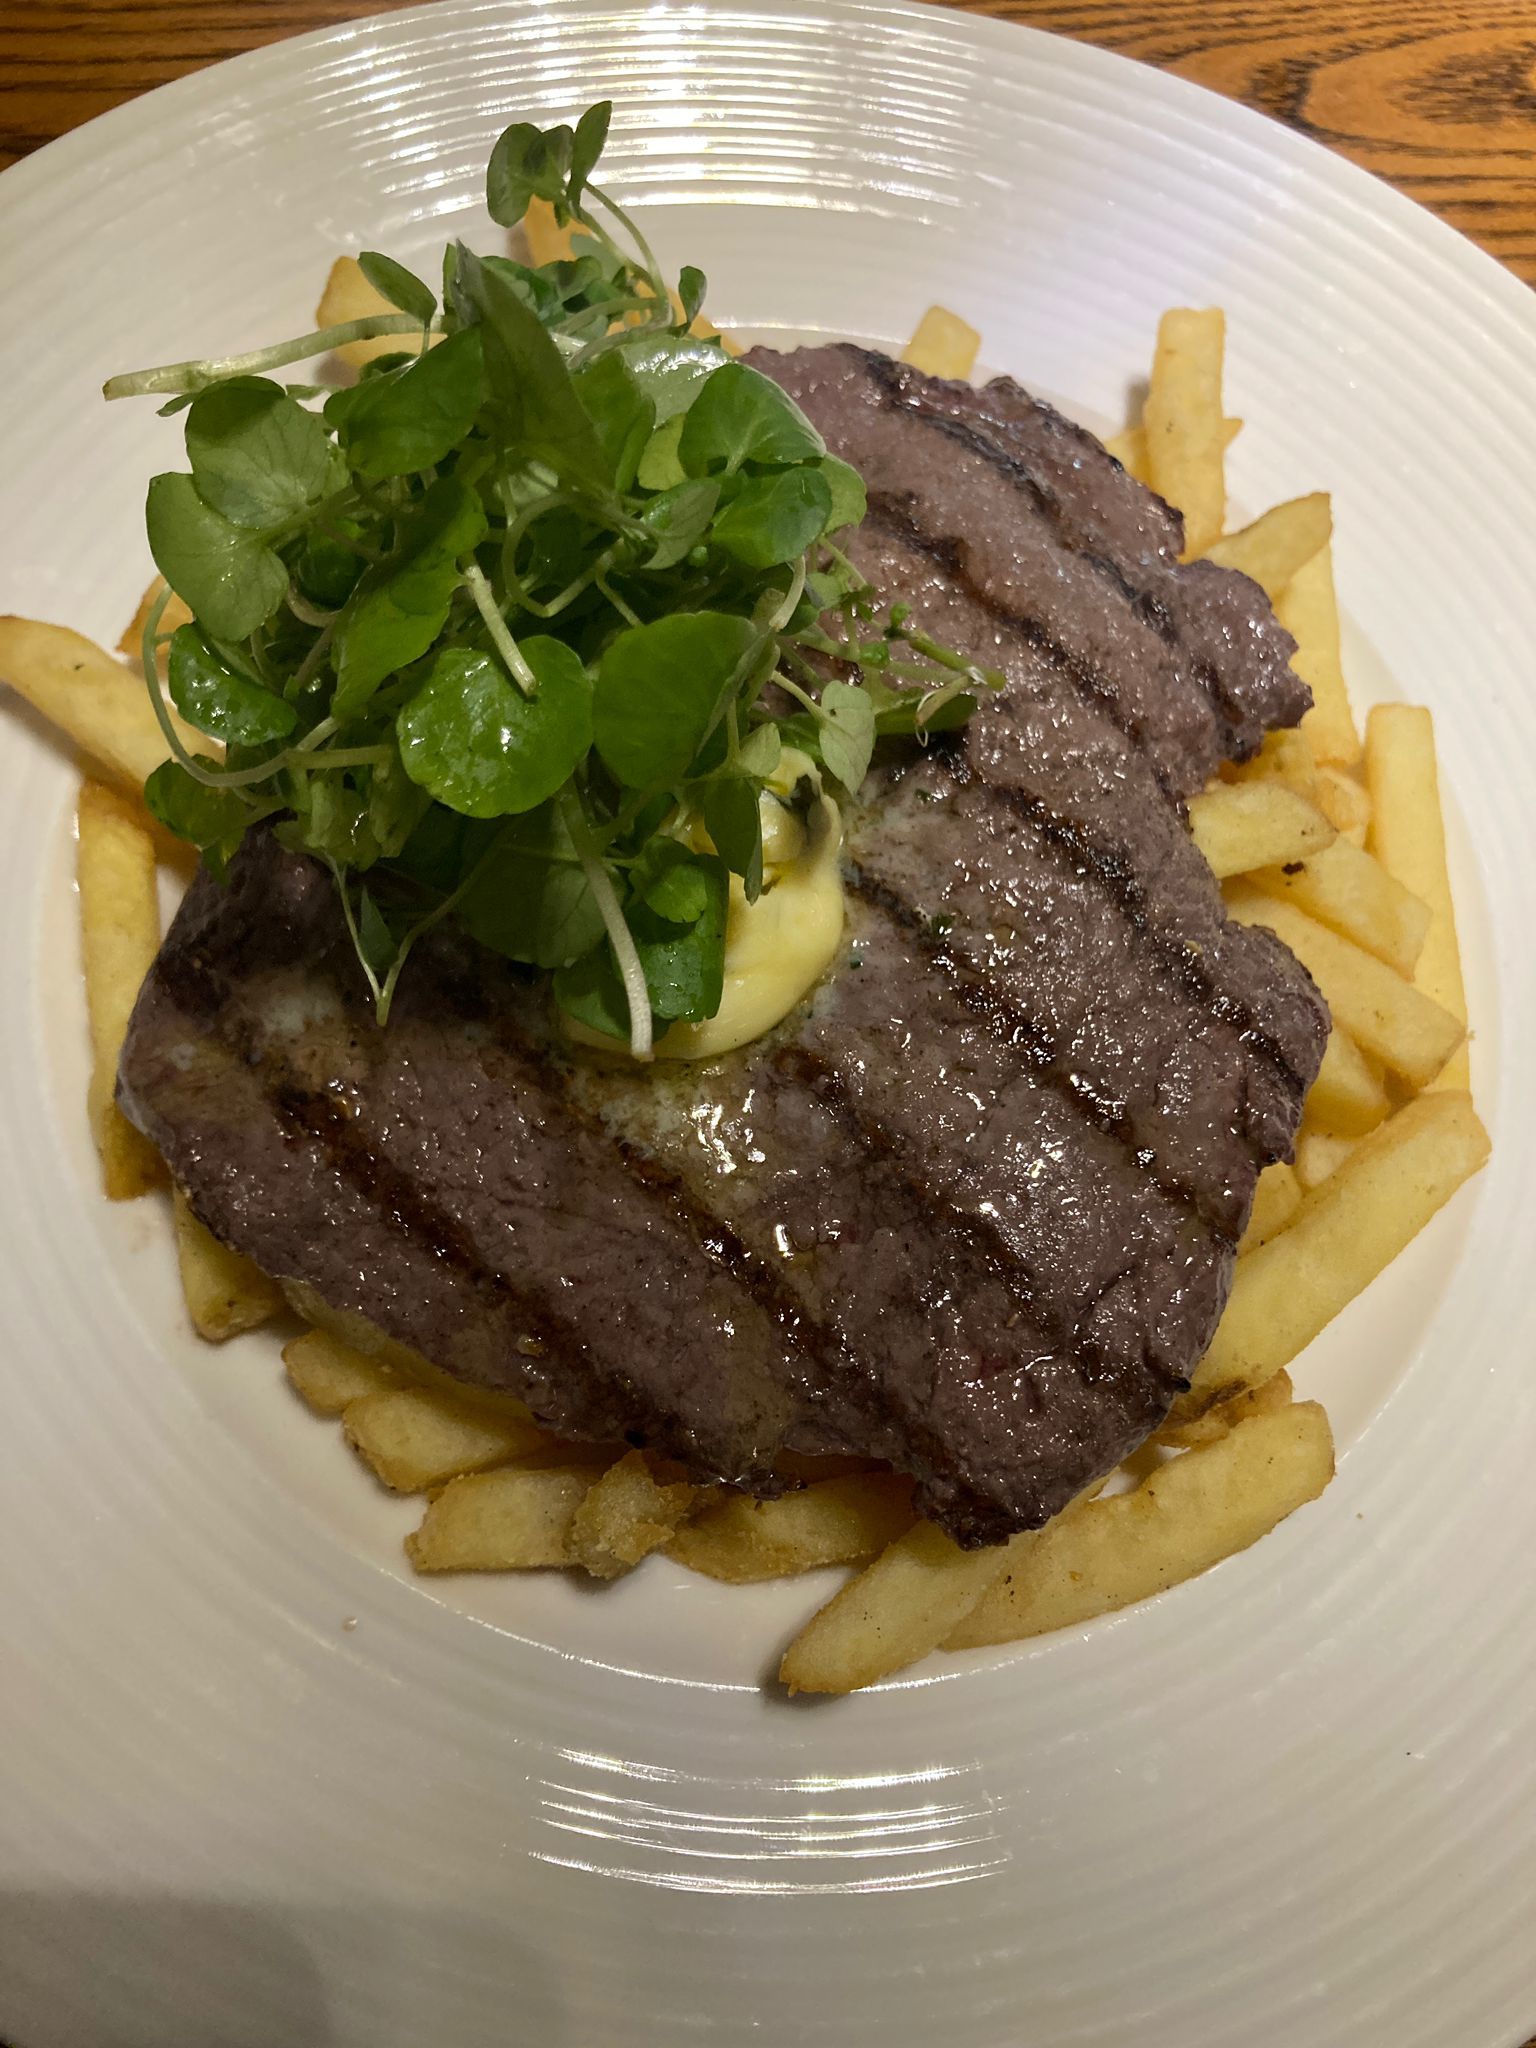 Steak frites - flattened 6oz rump steak with French fries and garlic butter